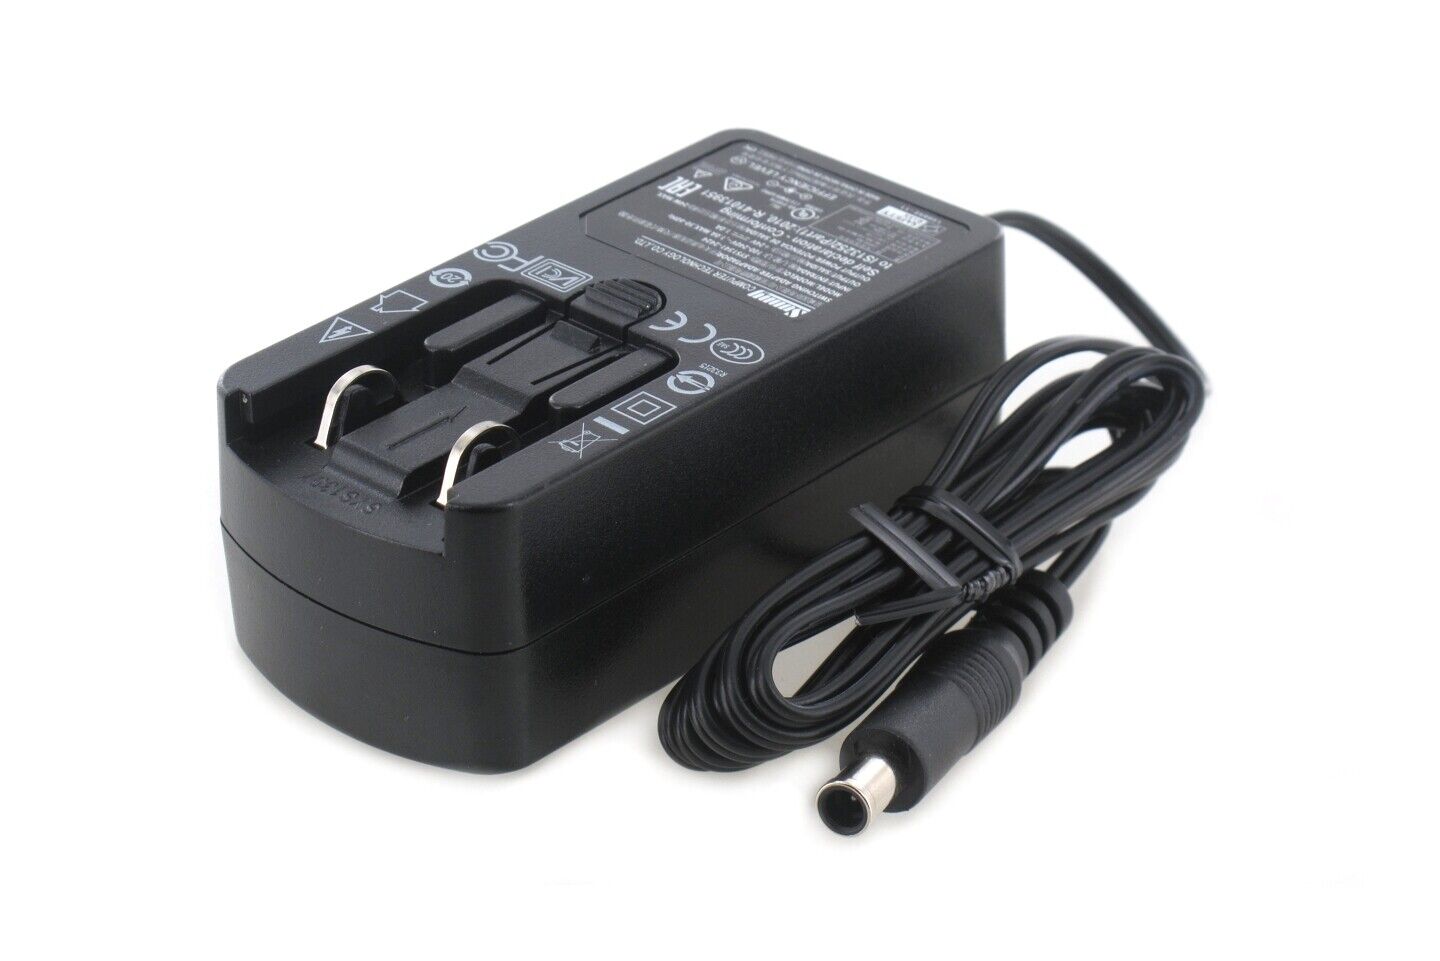 Replacement AC Adapter for SP-1120, SP-1125, SP-1130, SP-1120N, SP-1125N, SP-1130N